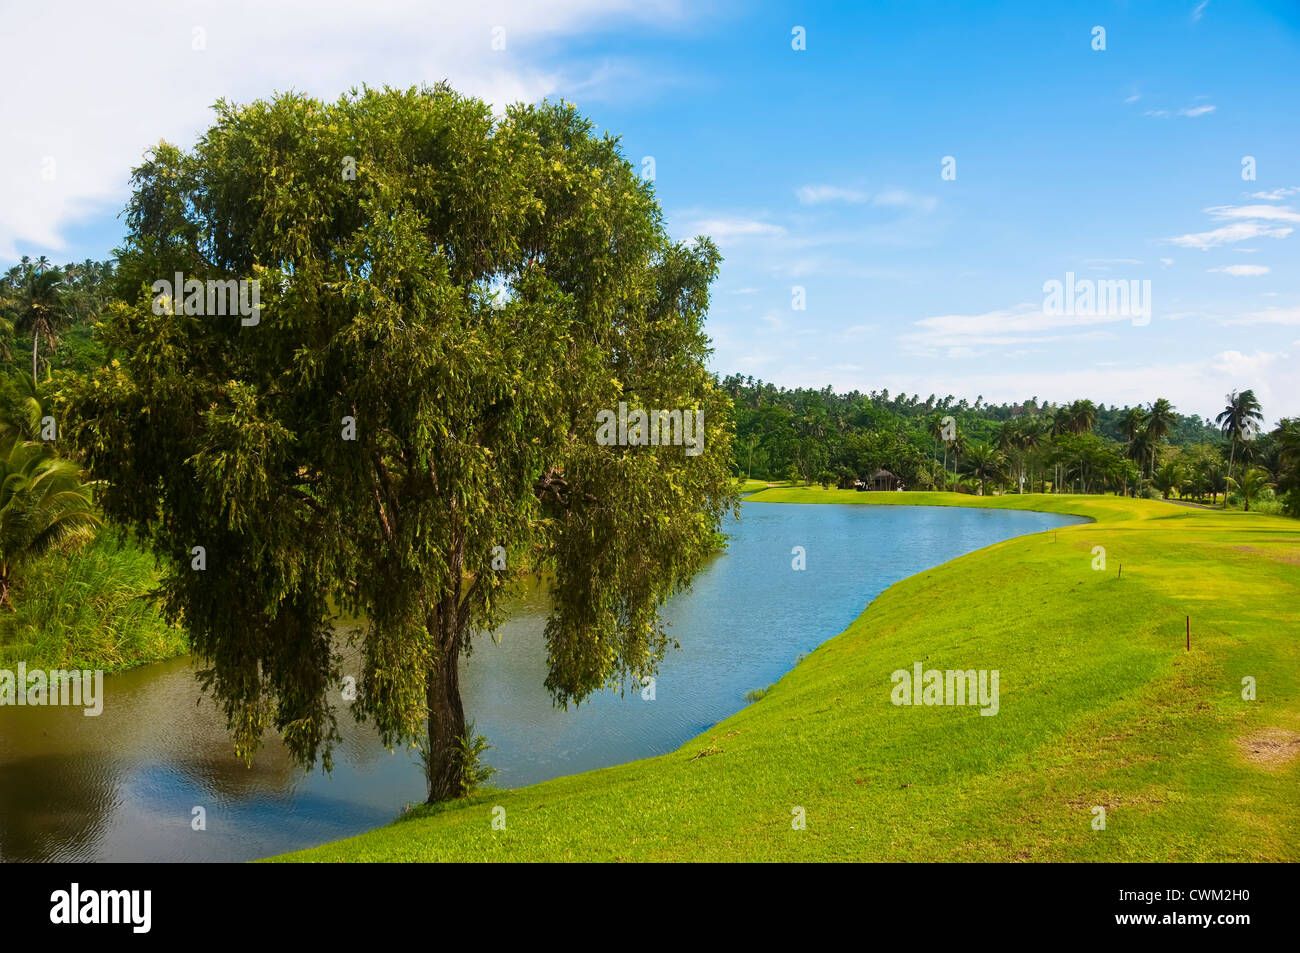 A beautiful golf course in the Philippines Stock Photo